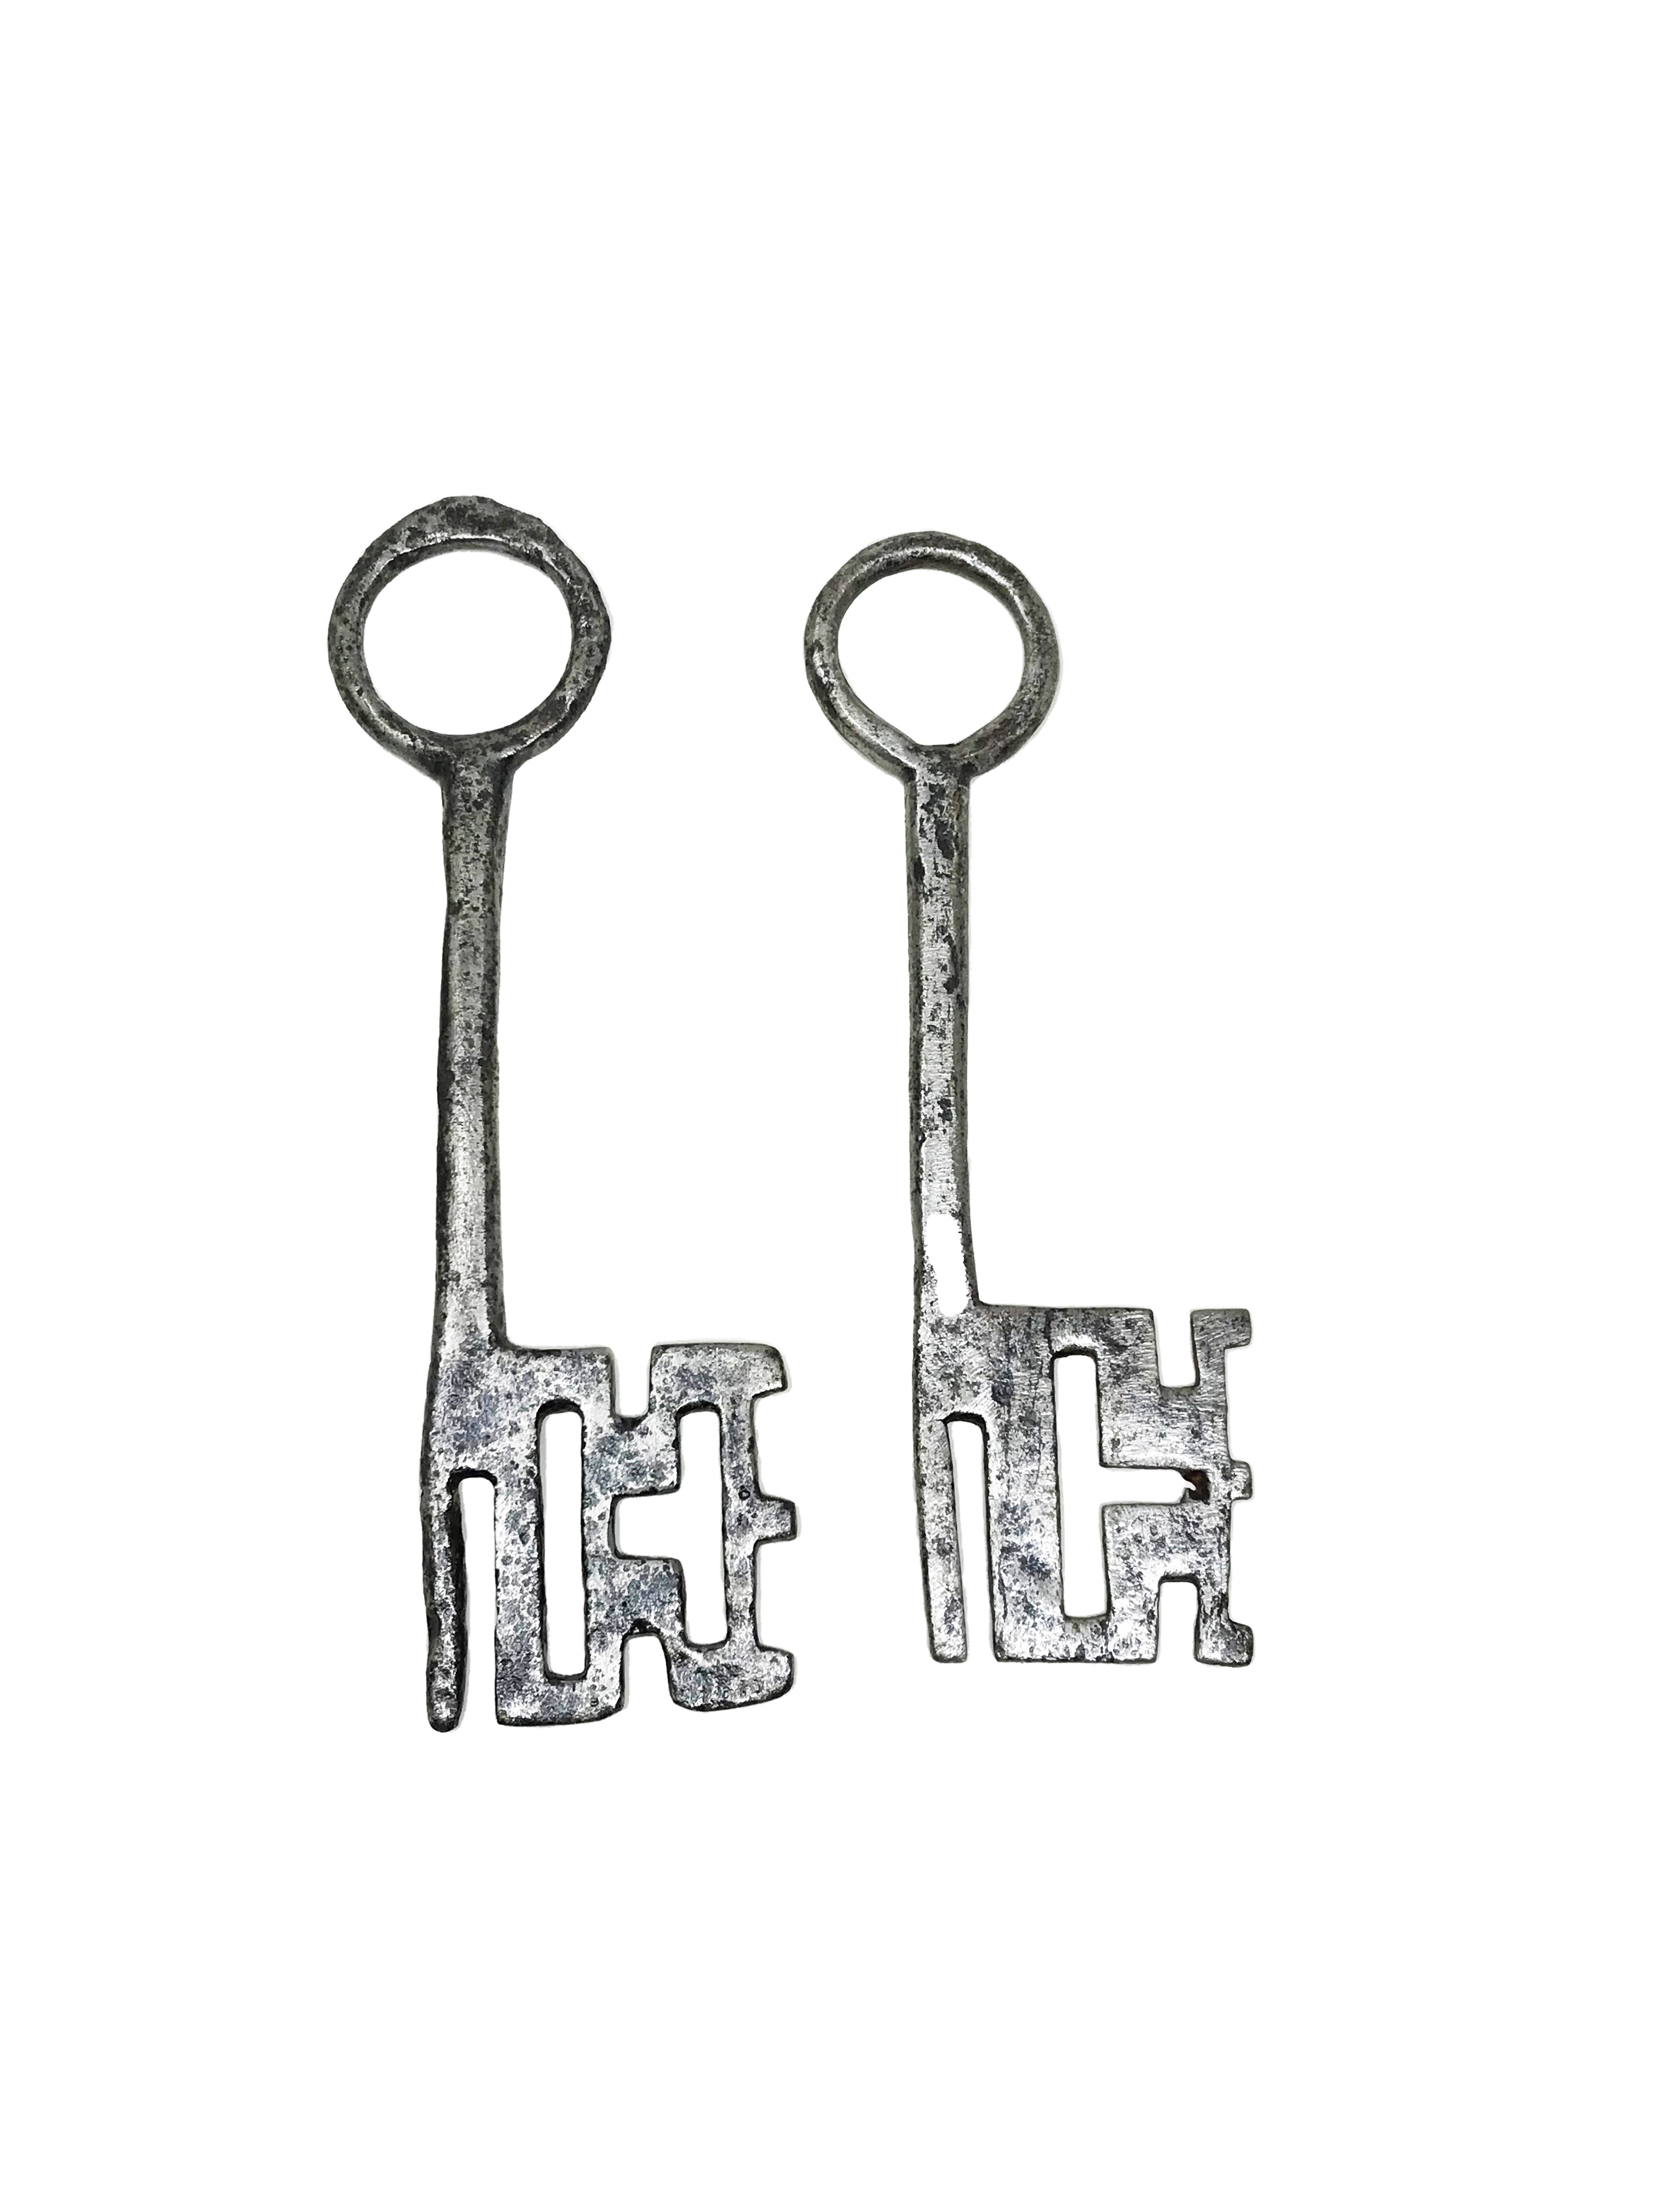 Two gothic keys19, 8 - 18, 2 cm.Part of the chapter "From the Time of the Cathedrals". - Bild 2 aus 2